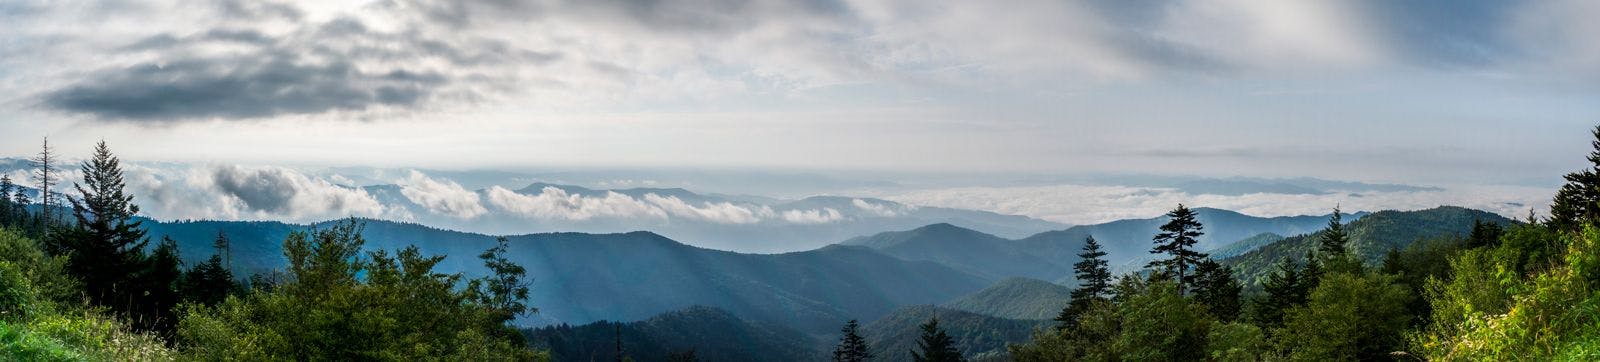 Panoramic image of Great Smoky Mountains landscape near Pigeon Forge